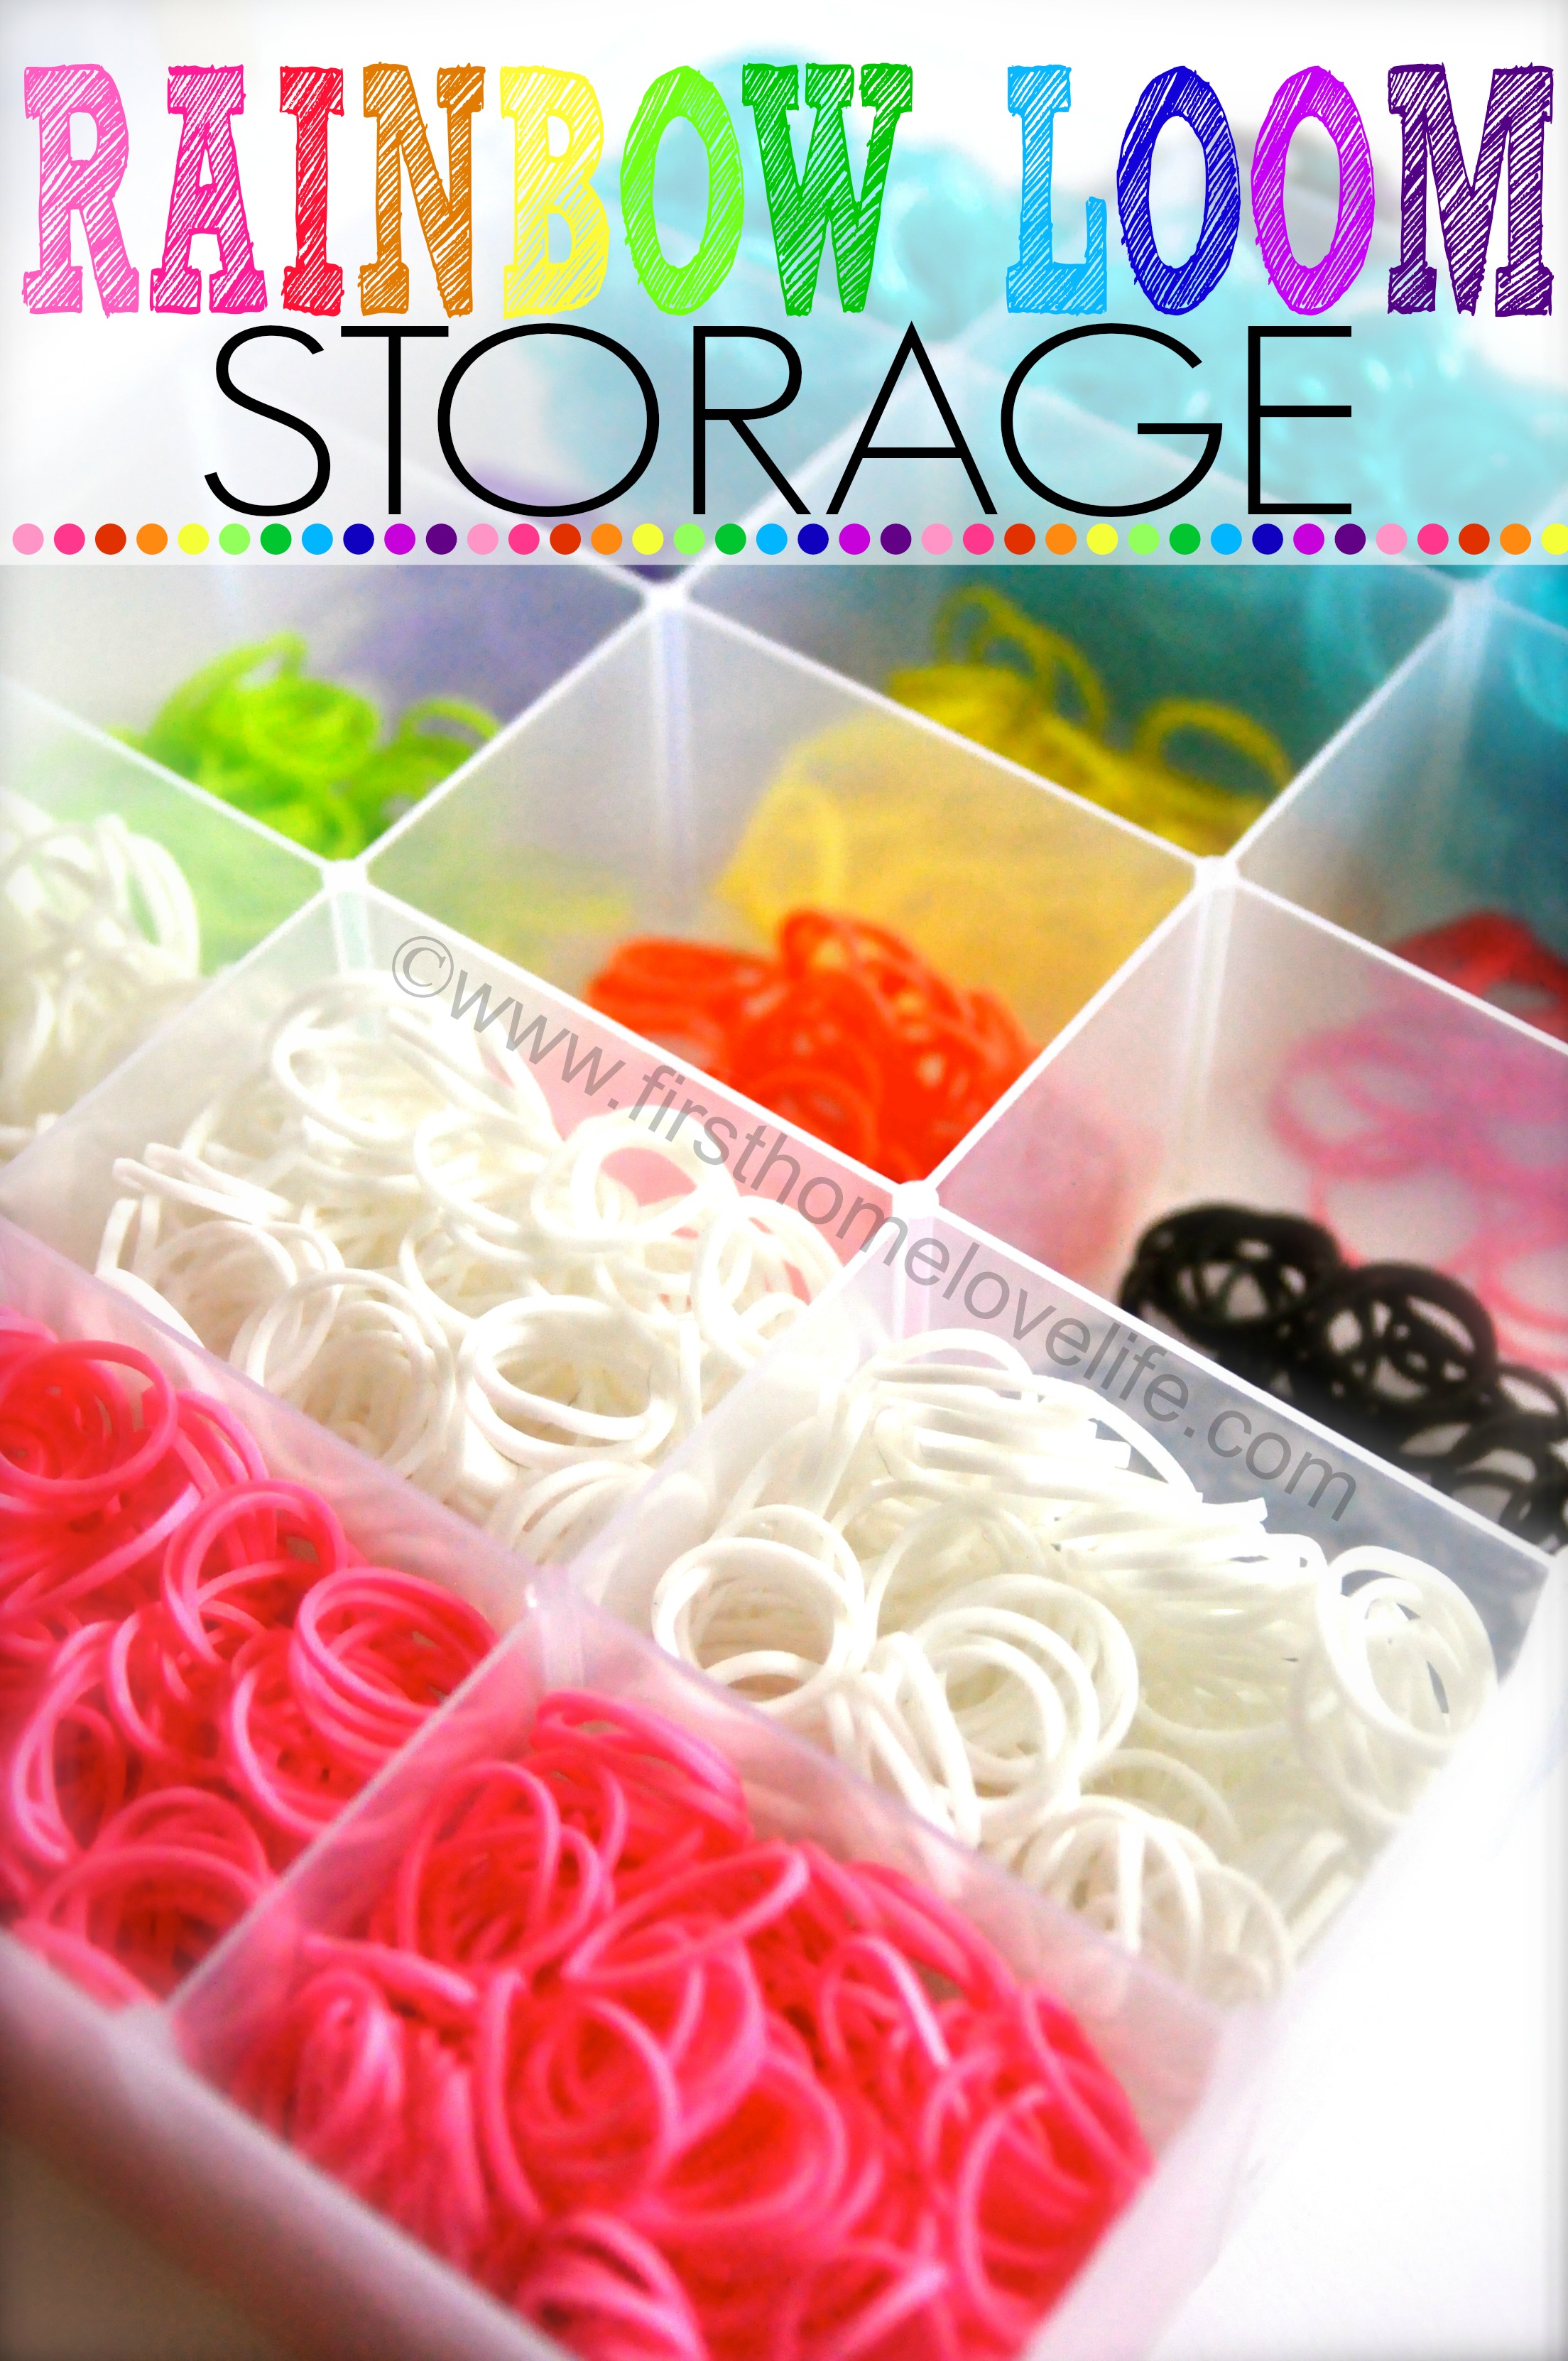 https://www.firsthomelovelife.com/wp-content/uploads/2013/12/RAINBOWLOOM_COVER.jpg